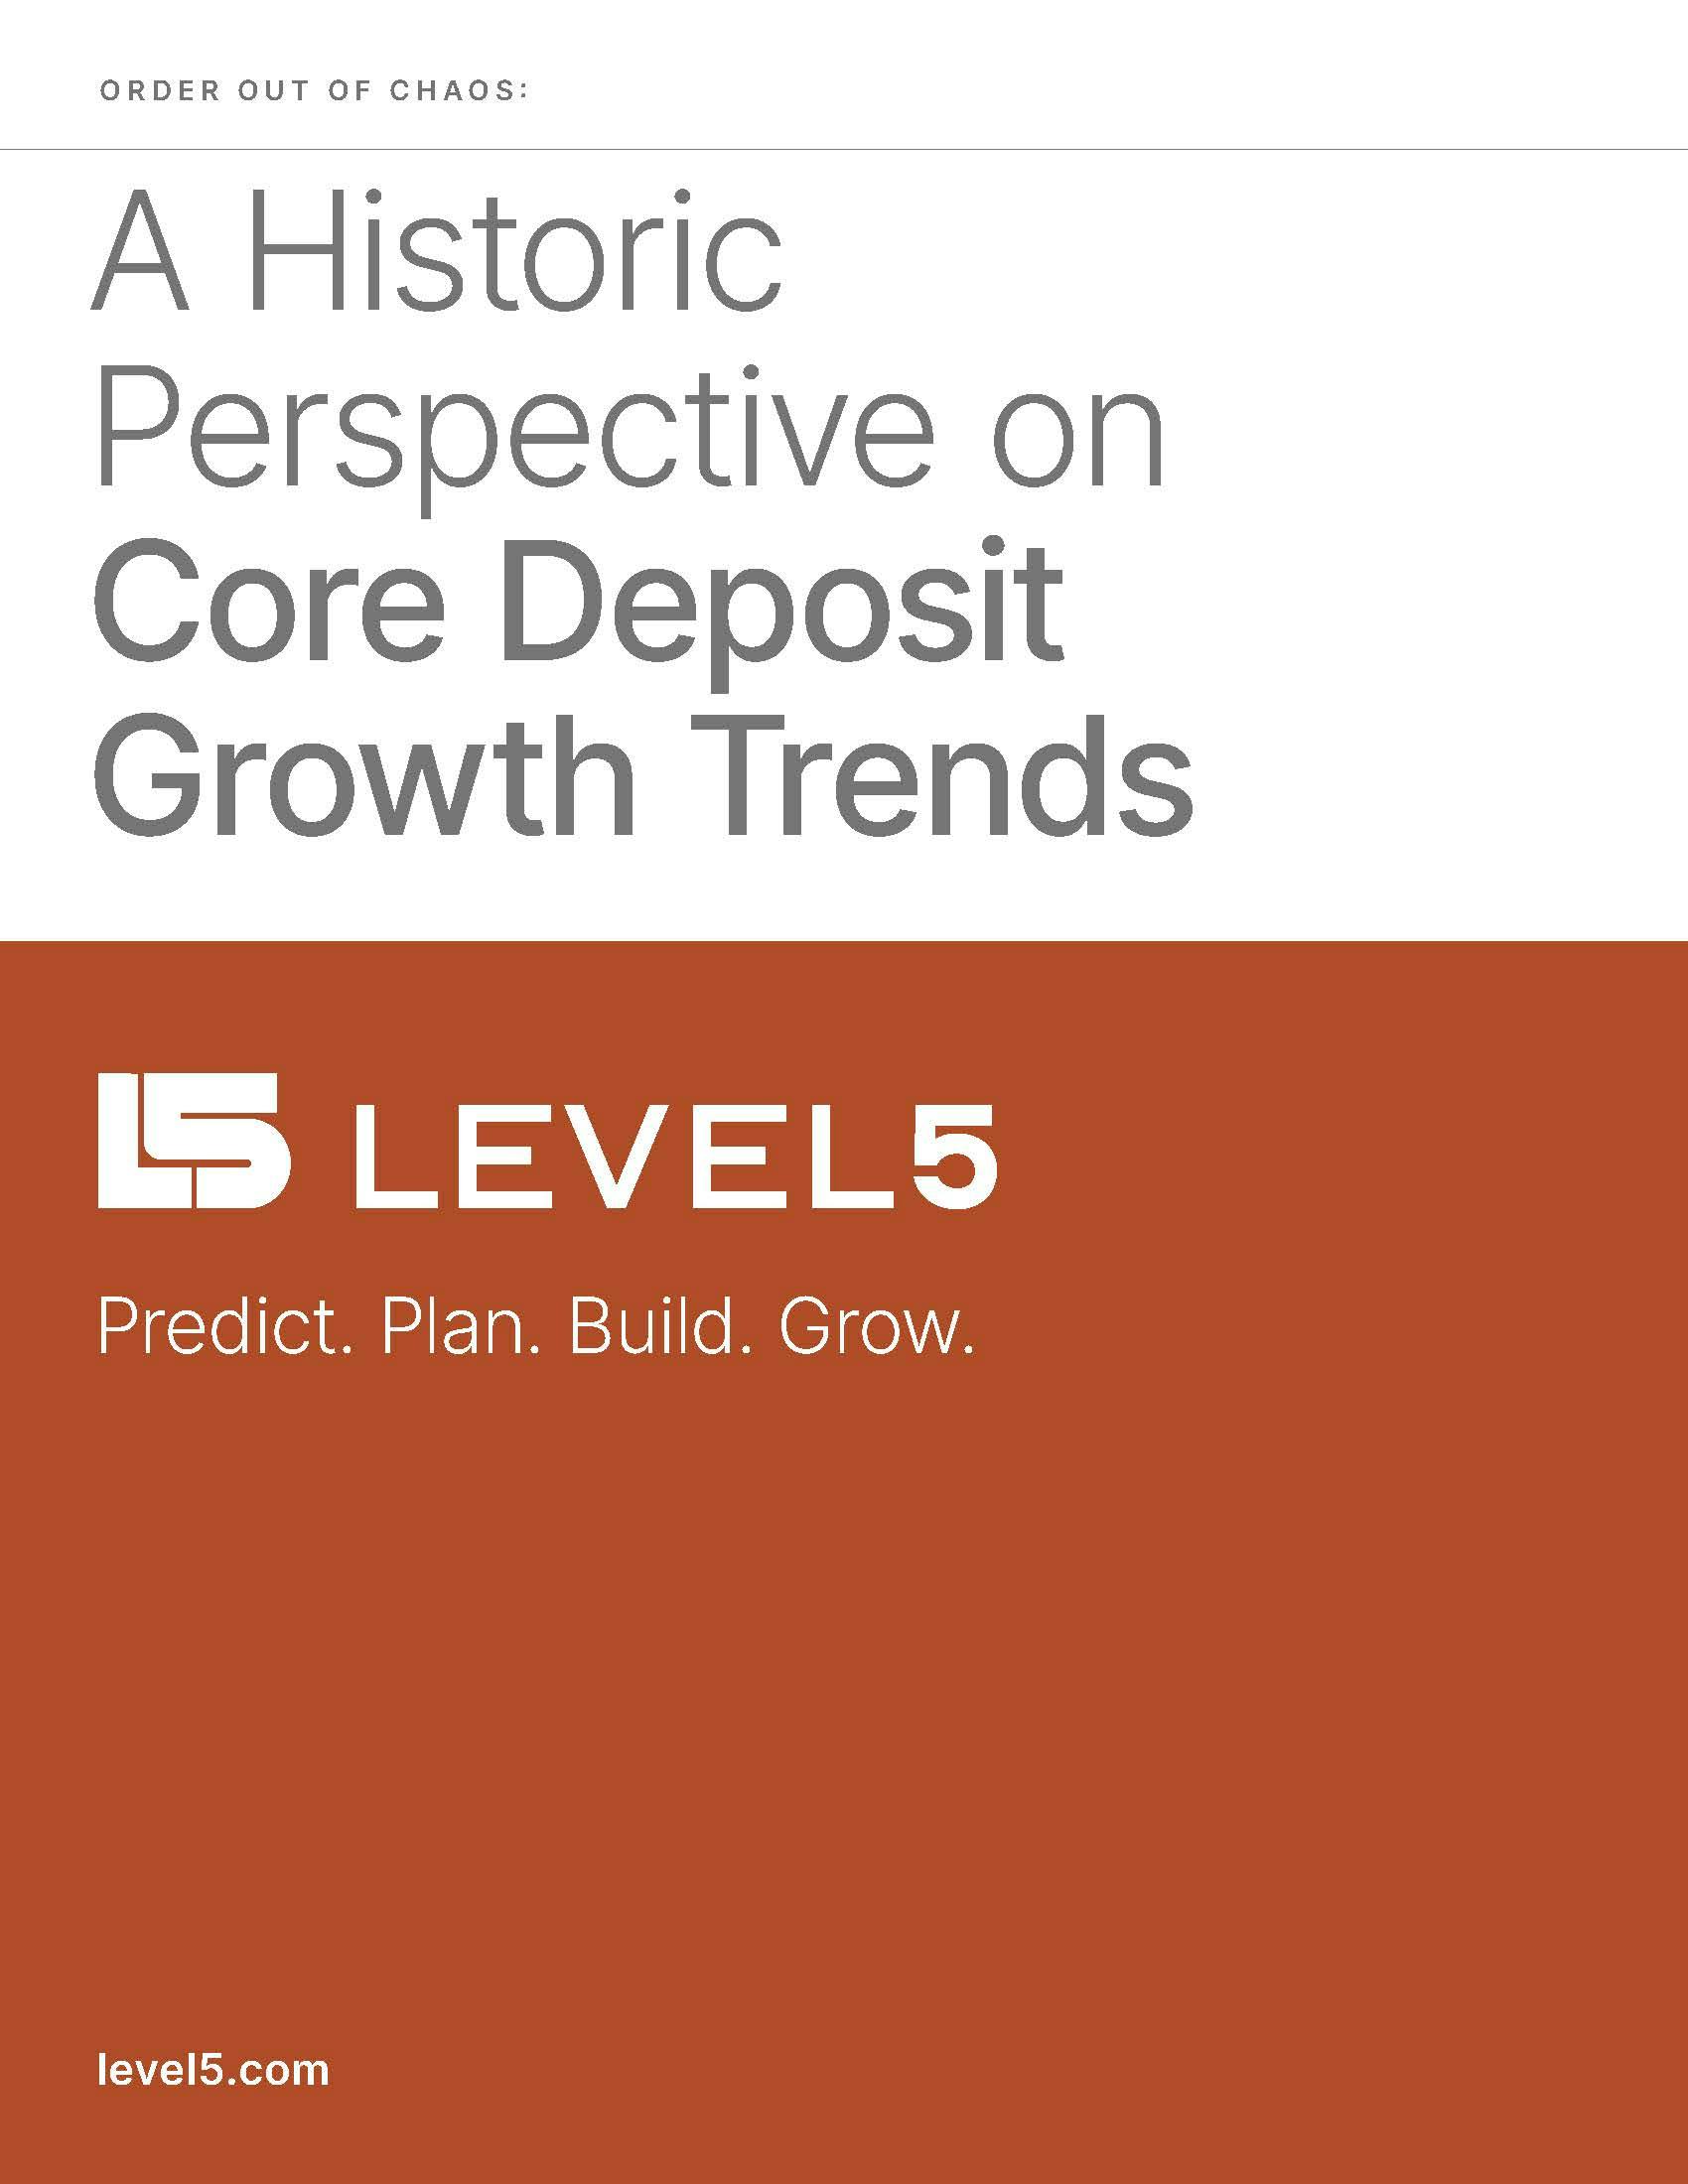 Title page for white paper: A Historic Perspective on Core Deposit Growth Trends